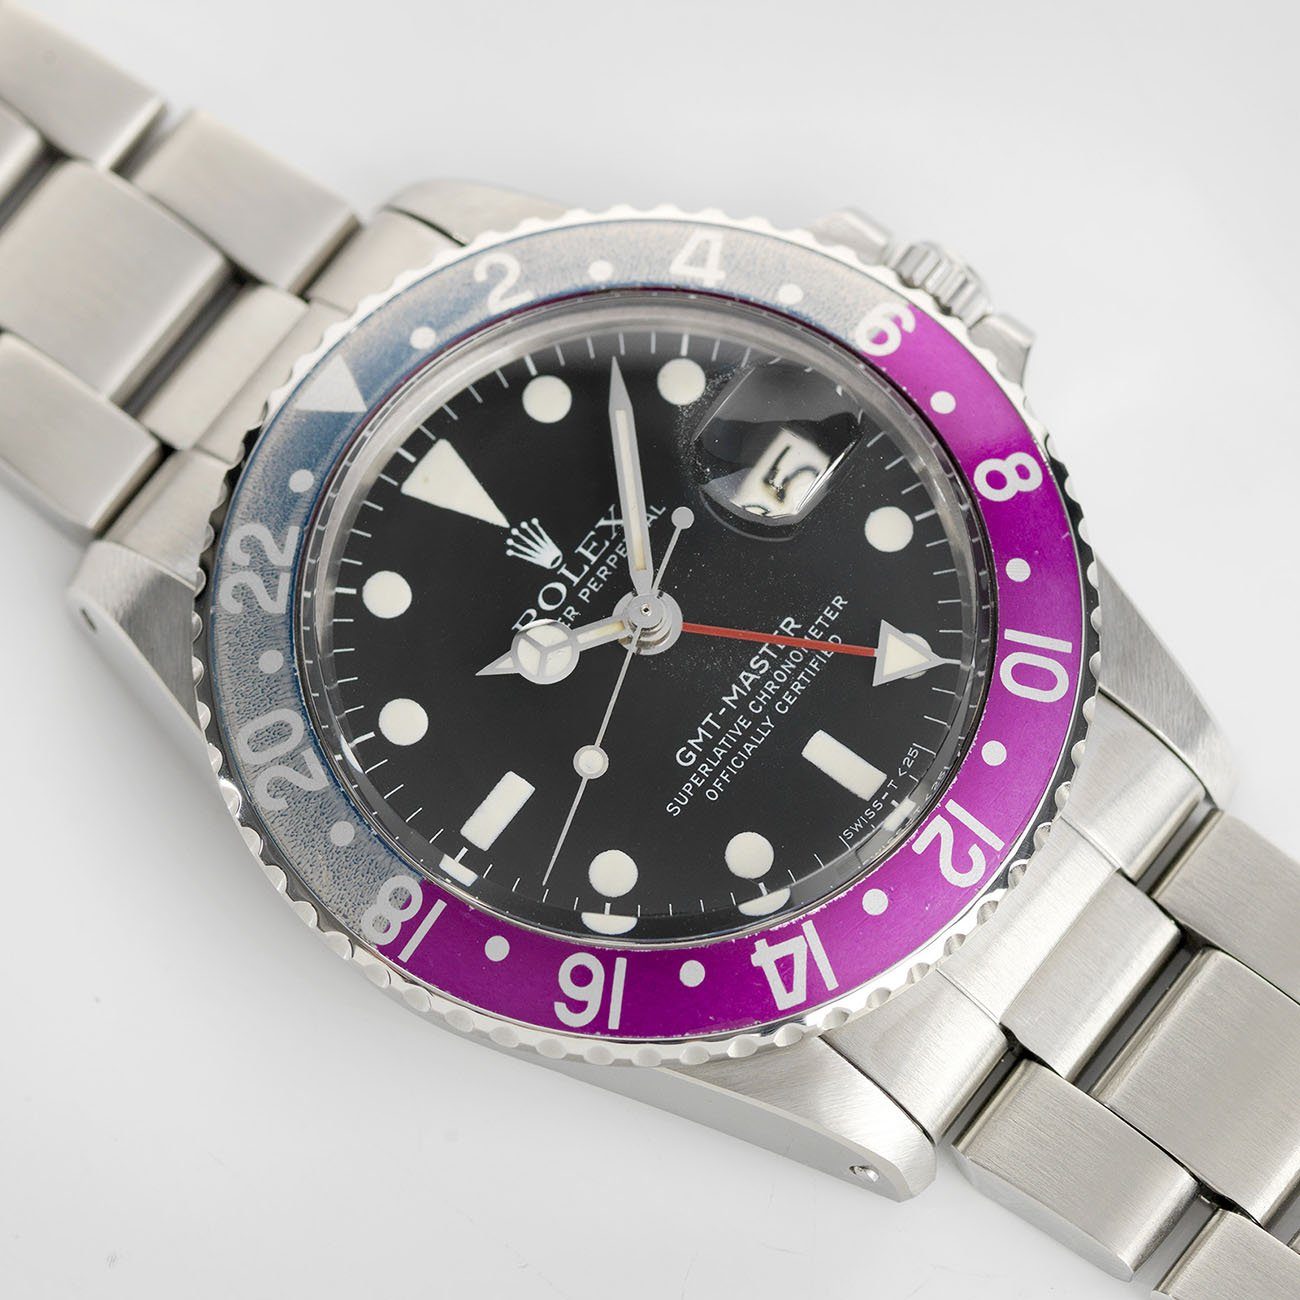 Rolex 1675 GMT Master Mk5 Maxi Dial Pink Lady